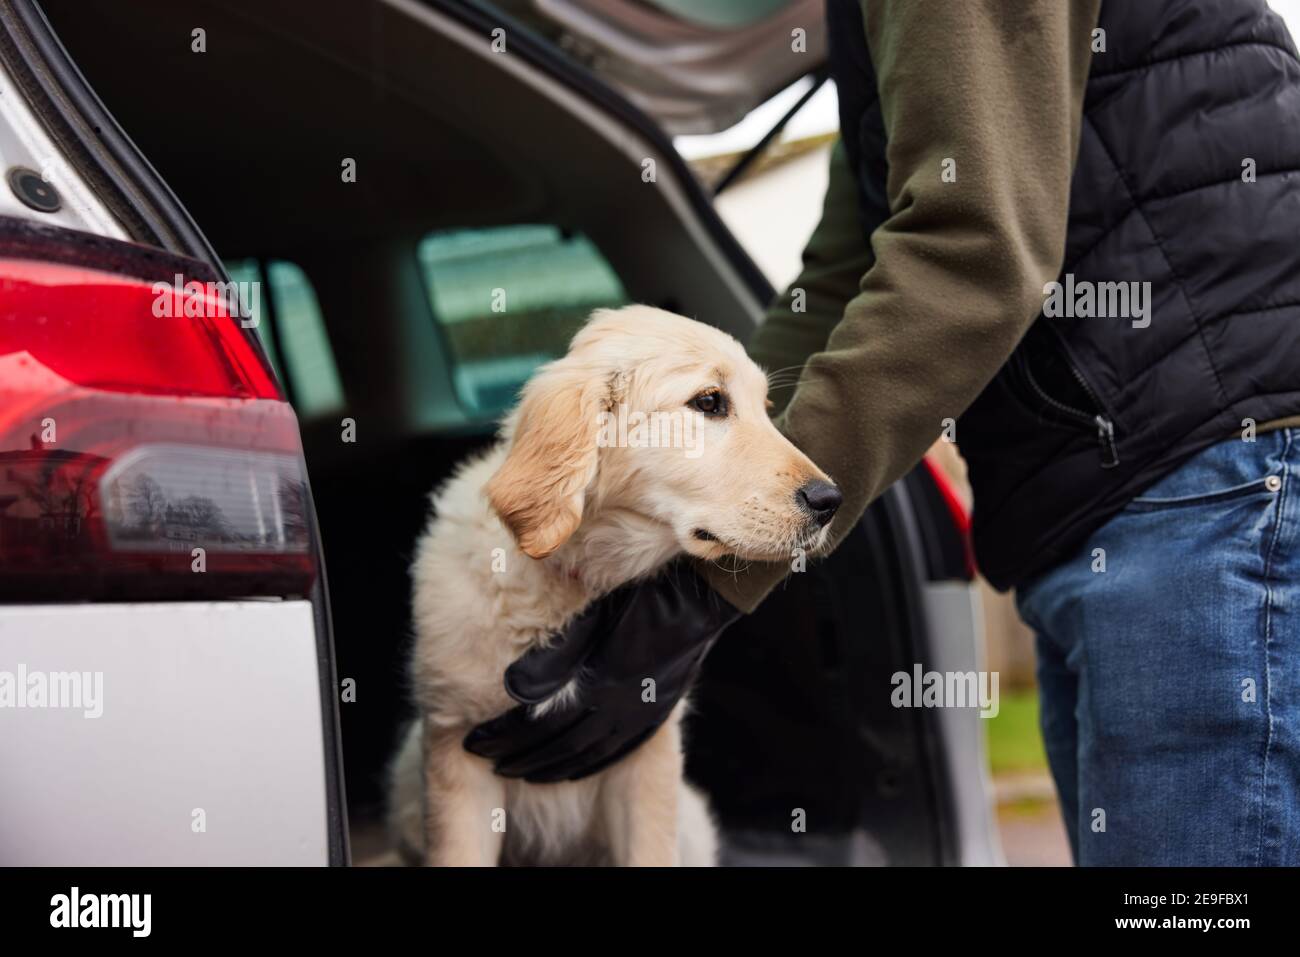 Male Criminal Stealing Or Dognapping Puppy And Putting Them In Car Stock Photo